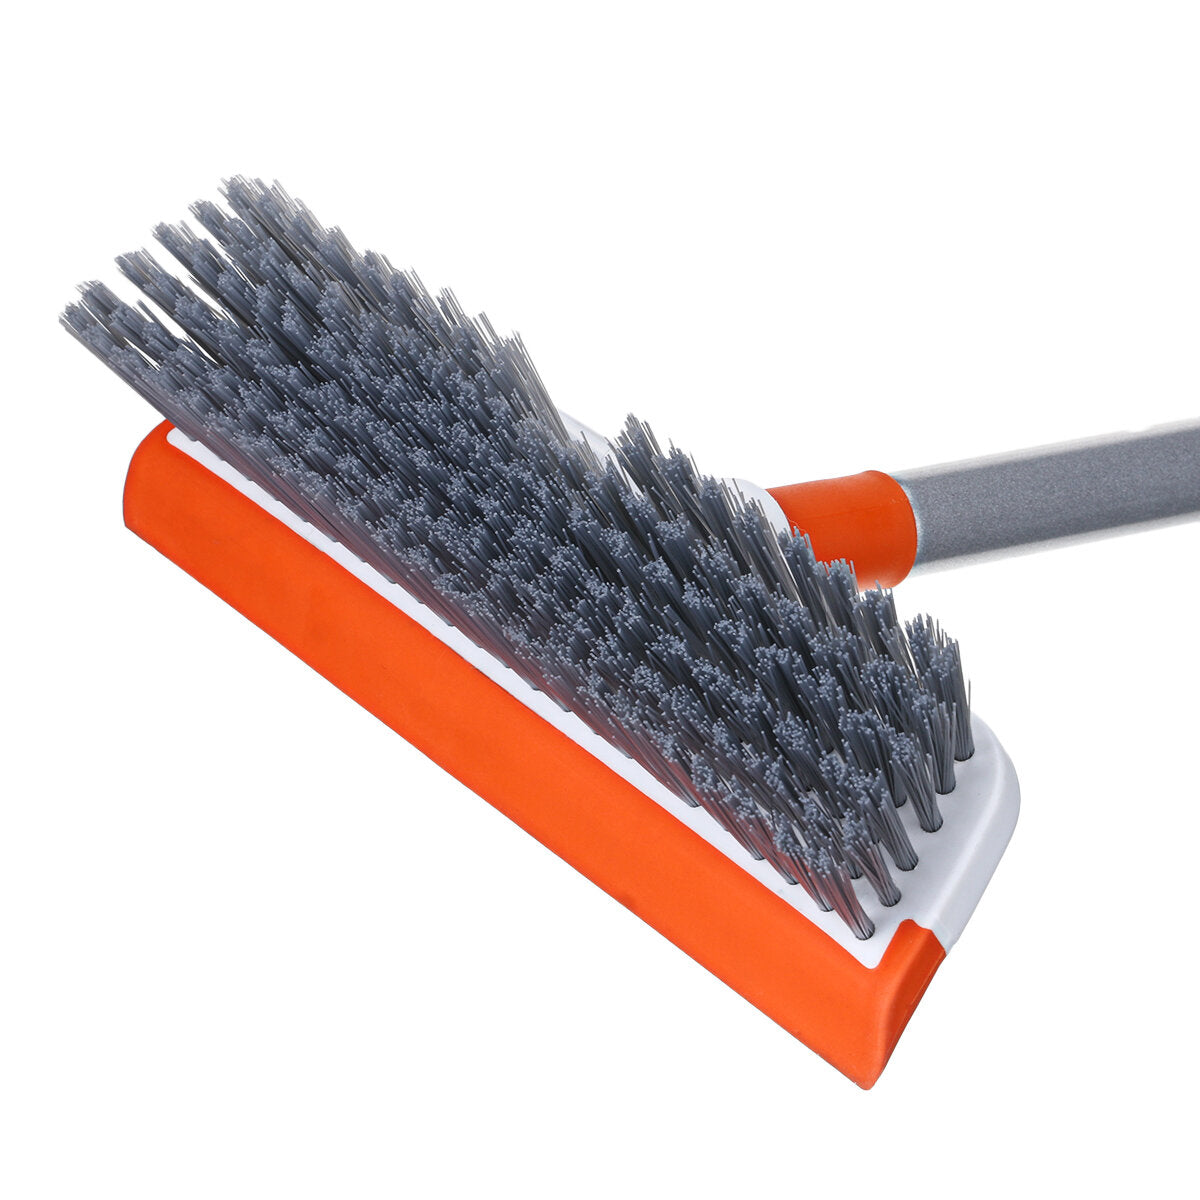 Floor Scrubs Brush with Floor Squeegee Scrubber 51" Detachable Long Handle Stiff Bristle Tub and Tile Brush for Cleaning Shower Bathroom Kitchen Wall Model MSB001